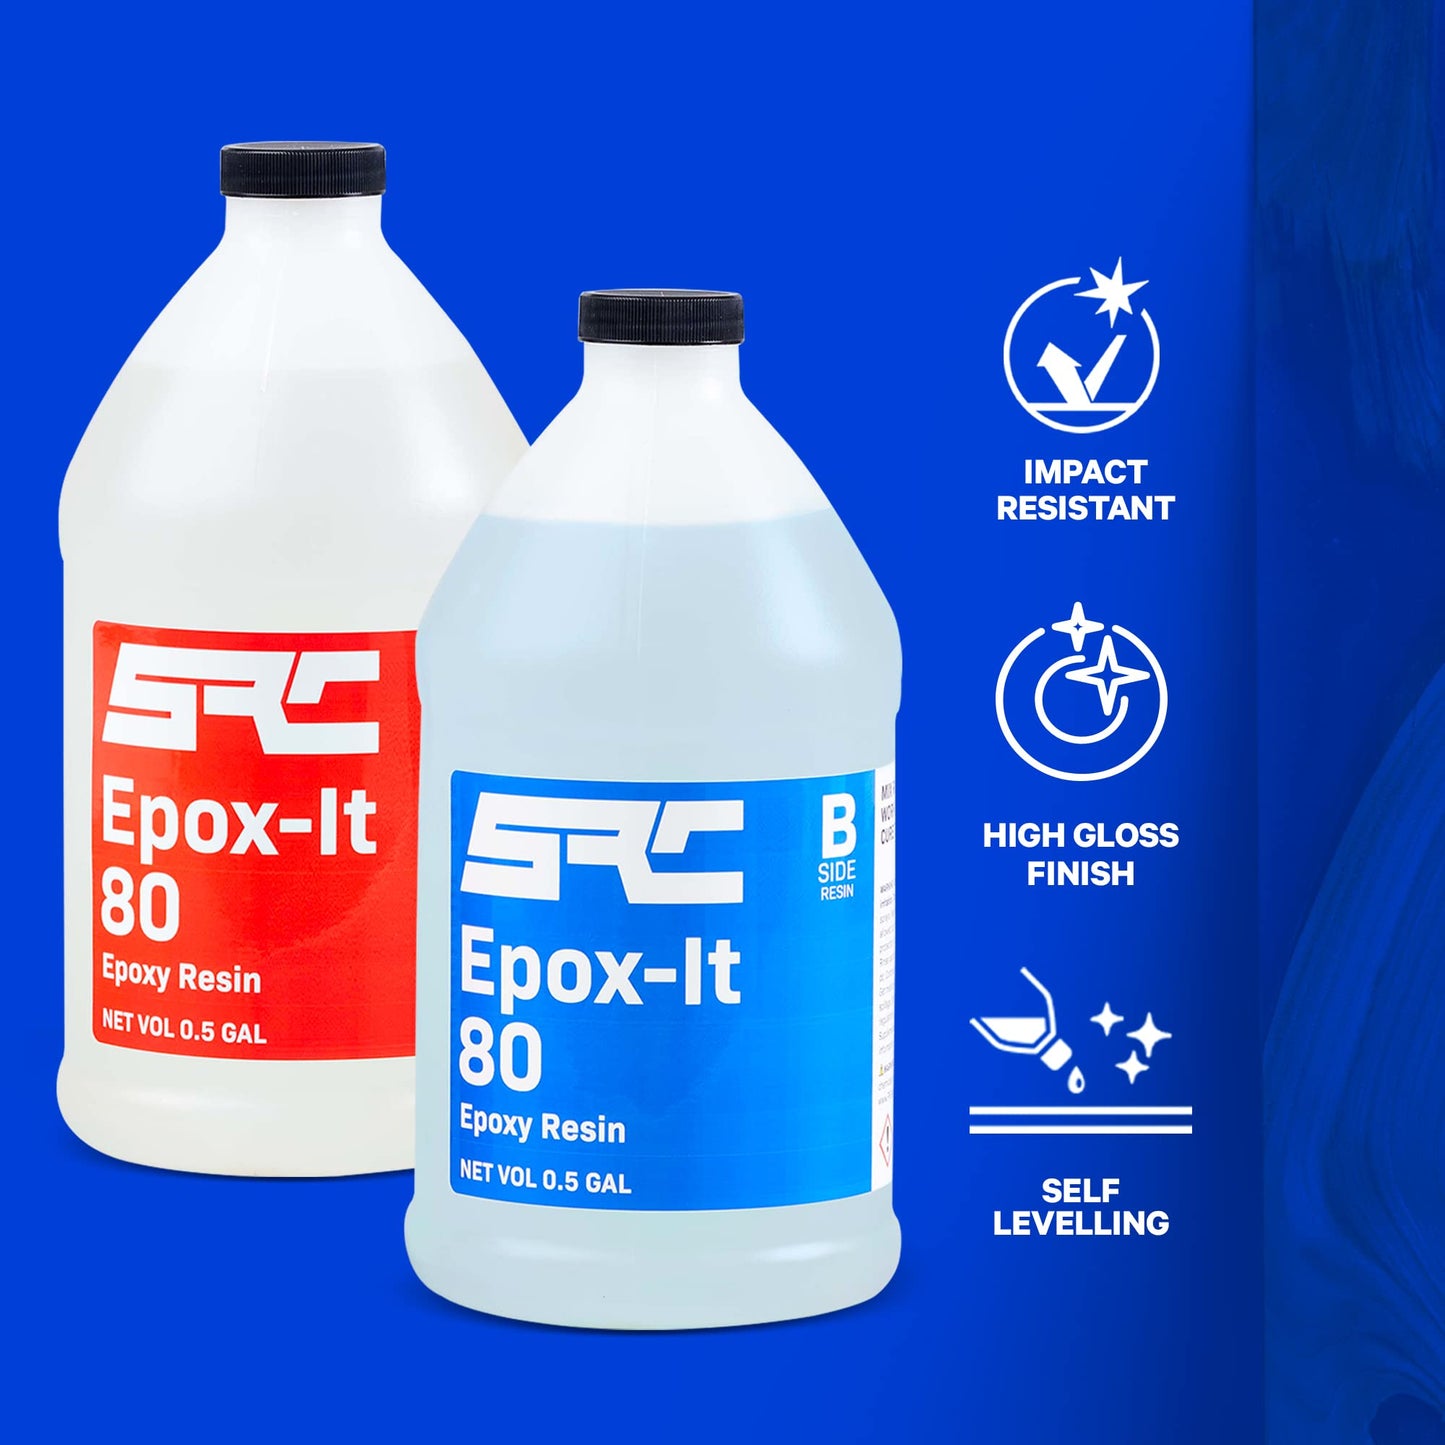 Specialty Resin & Chemical Epox-It 80 (1 Gal)| Clear Epoxy Resin Kit for Beginners & Experts| Clear Epoxy Coating for Bar Top, Countertop,